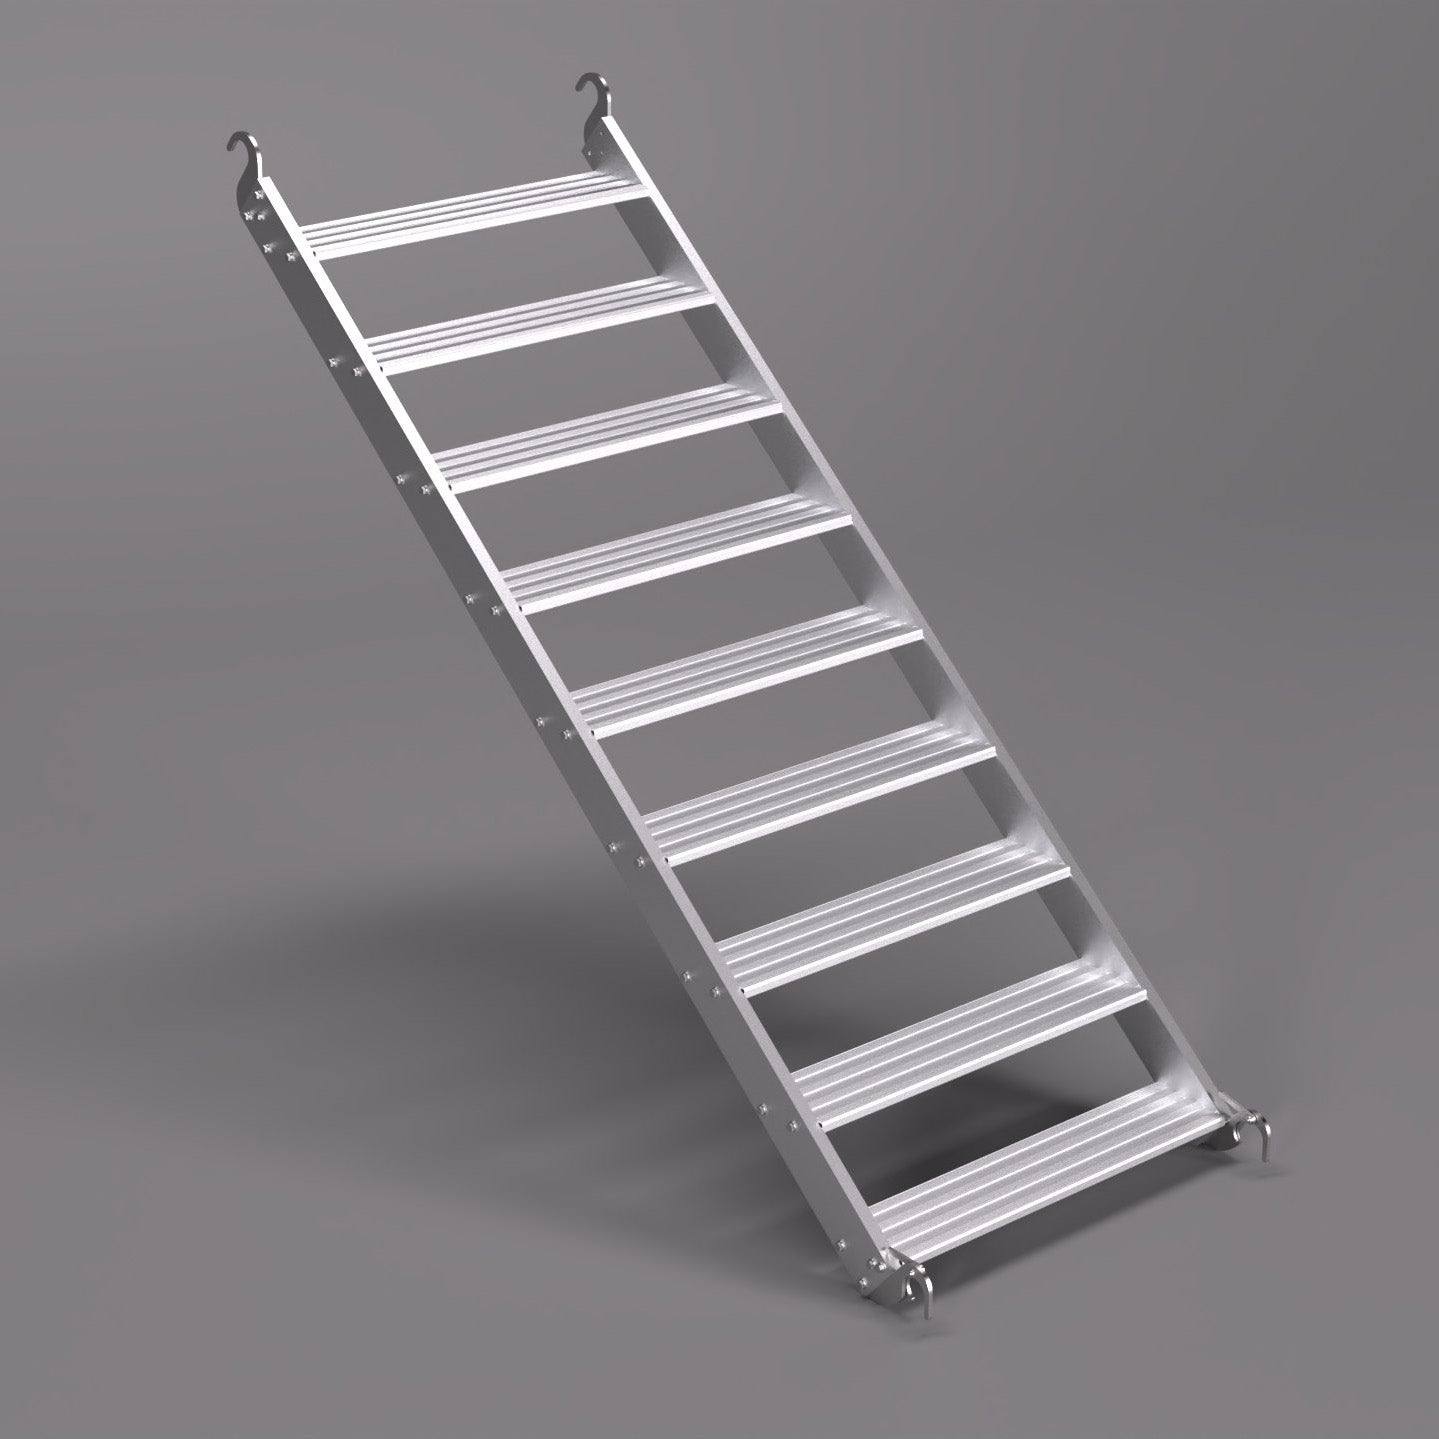 An image of the 1.5m ALTO Cup System stair unit.